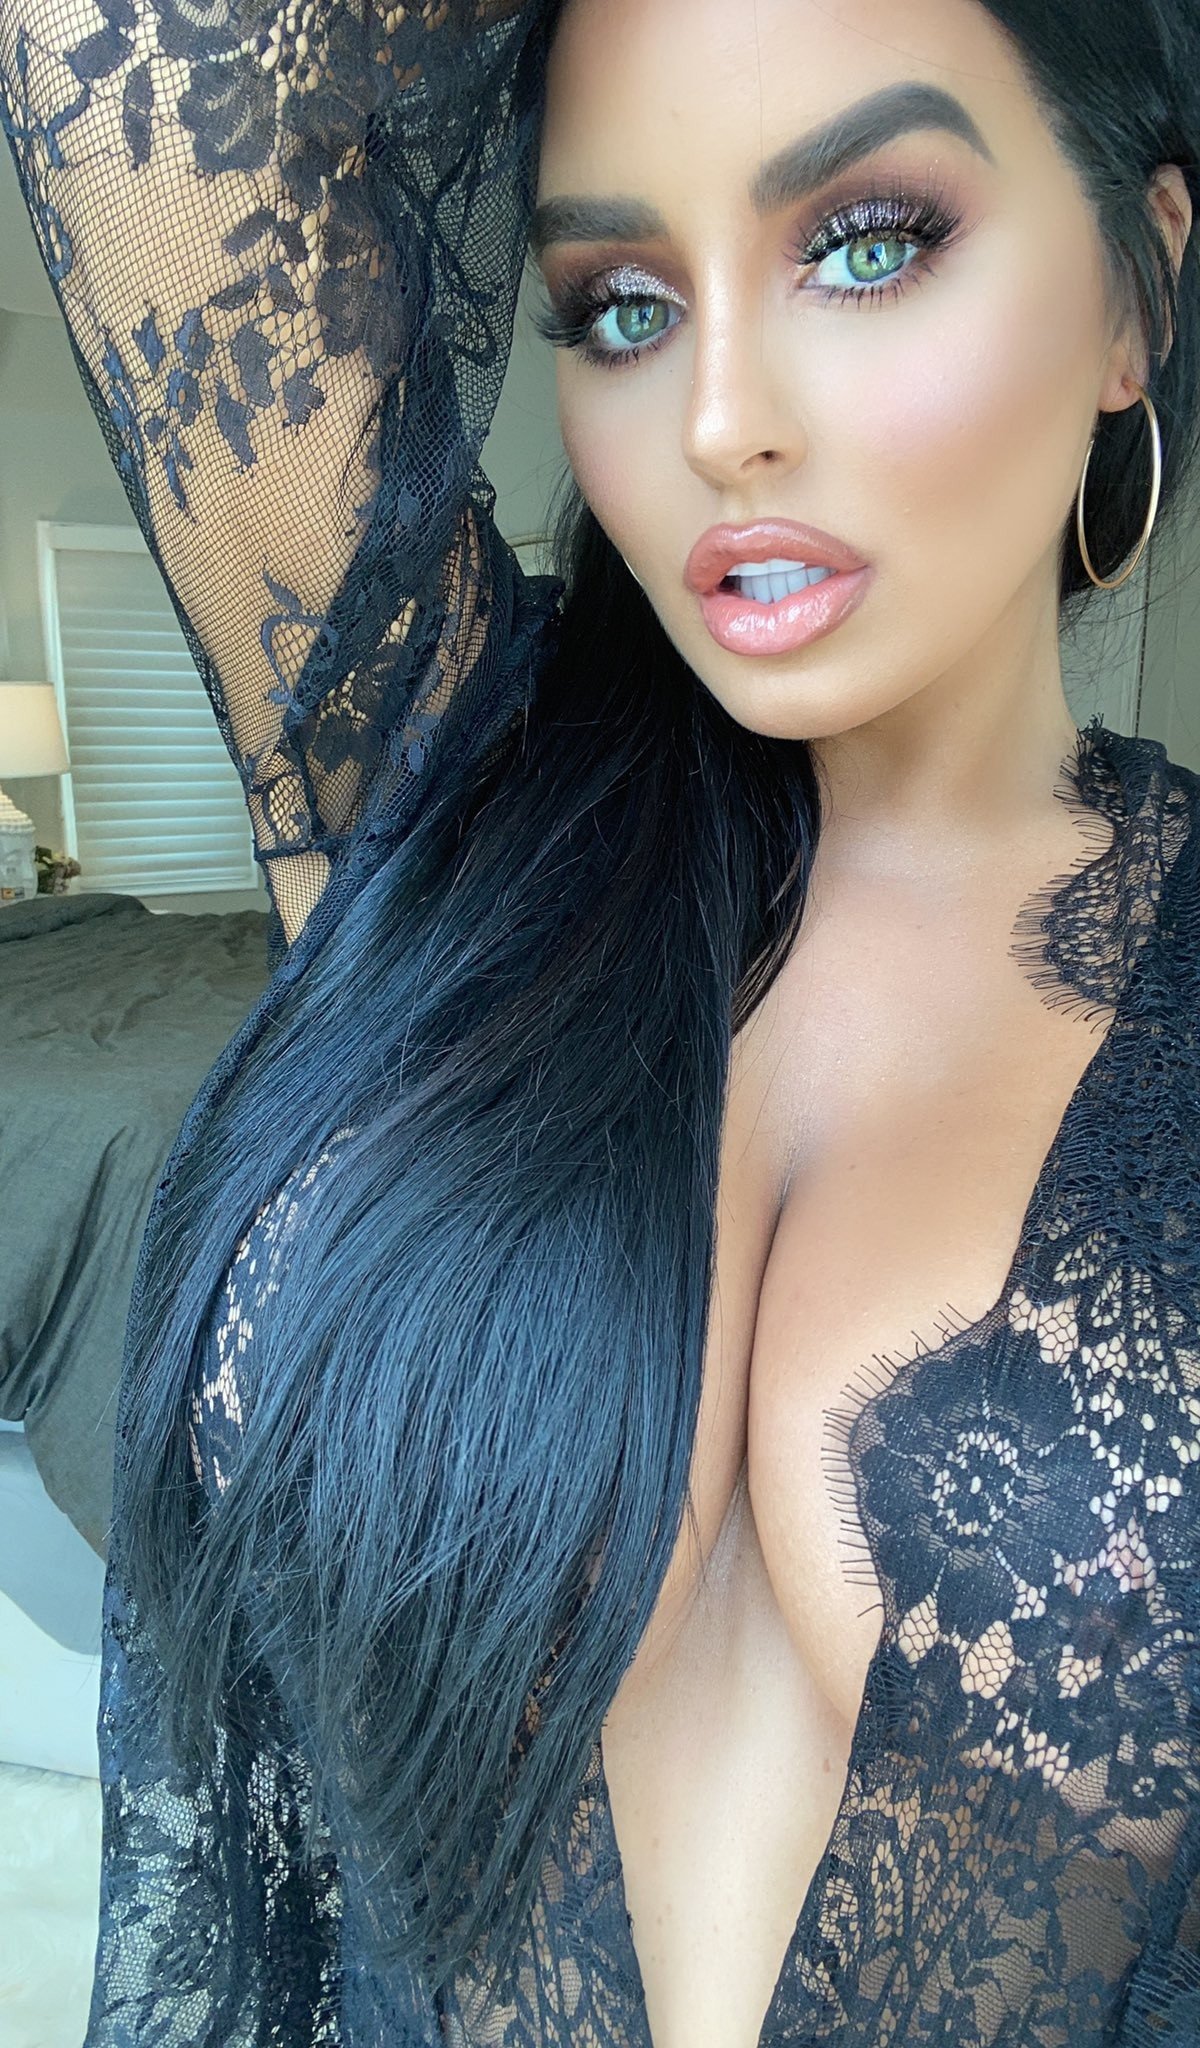 Photo by 2busty with the username @2busty, who is a brand user, posted on December 19, 2019. The post is about the topic 2busty and the text says 'Abigail Ratchford - The Queen of Instagram
Follow her @ Twitter: AbiRatchford'